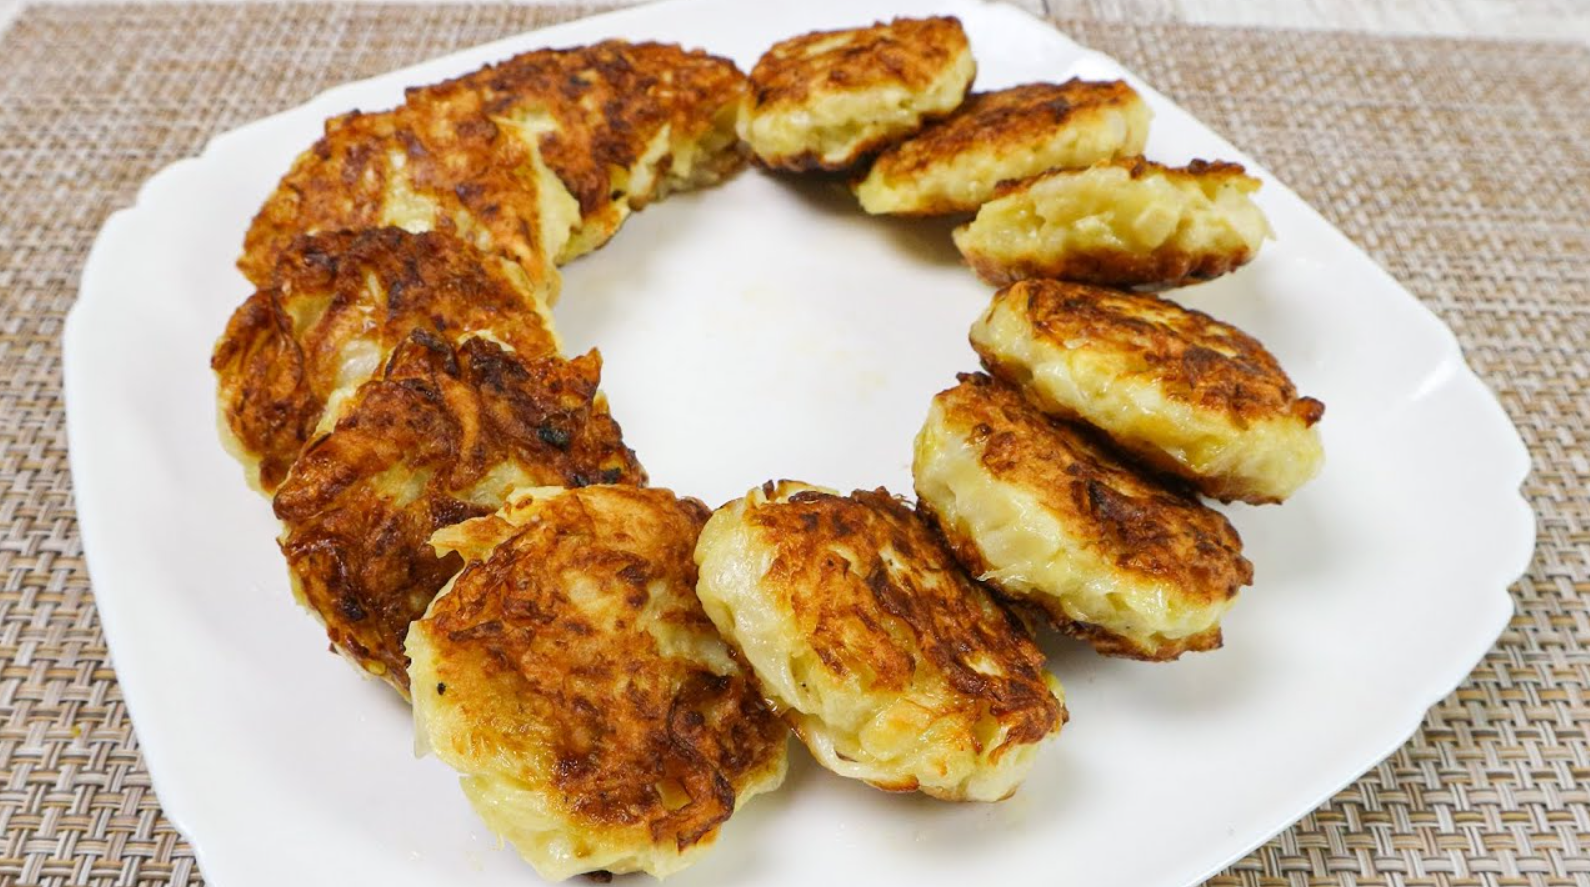 How to cook cabbage cutlets